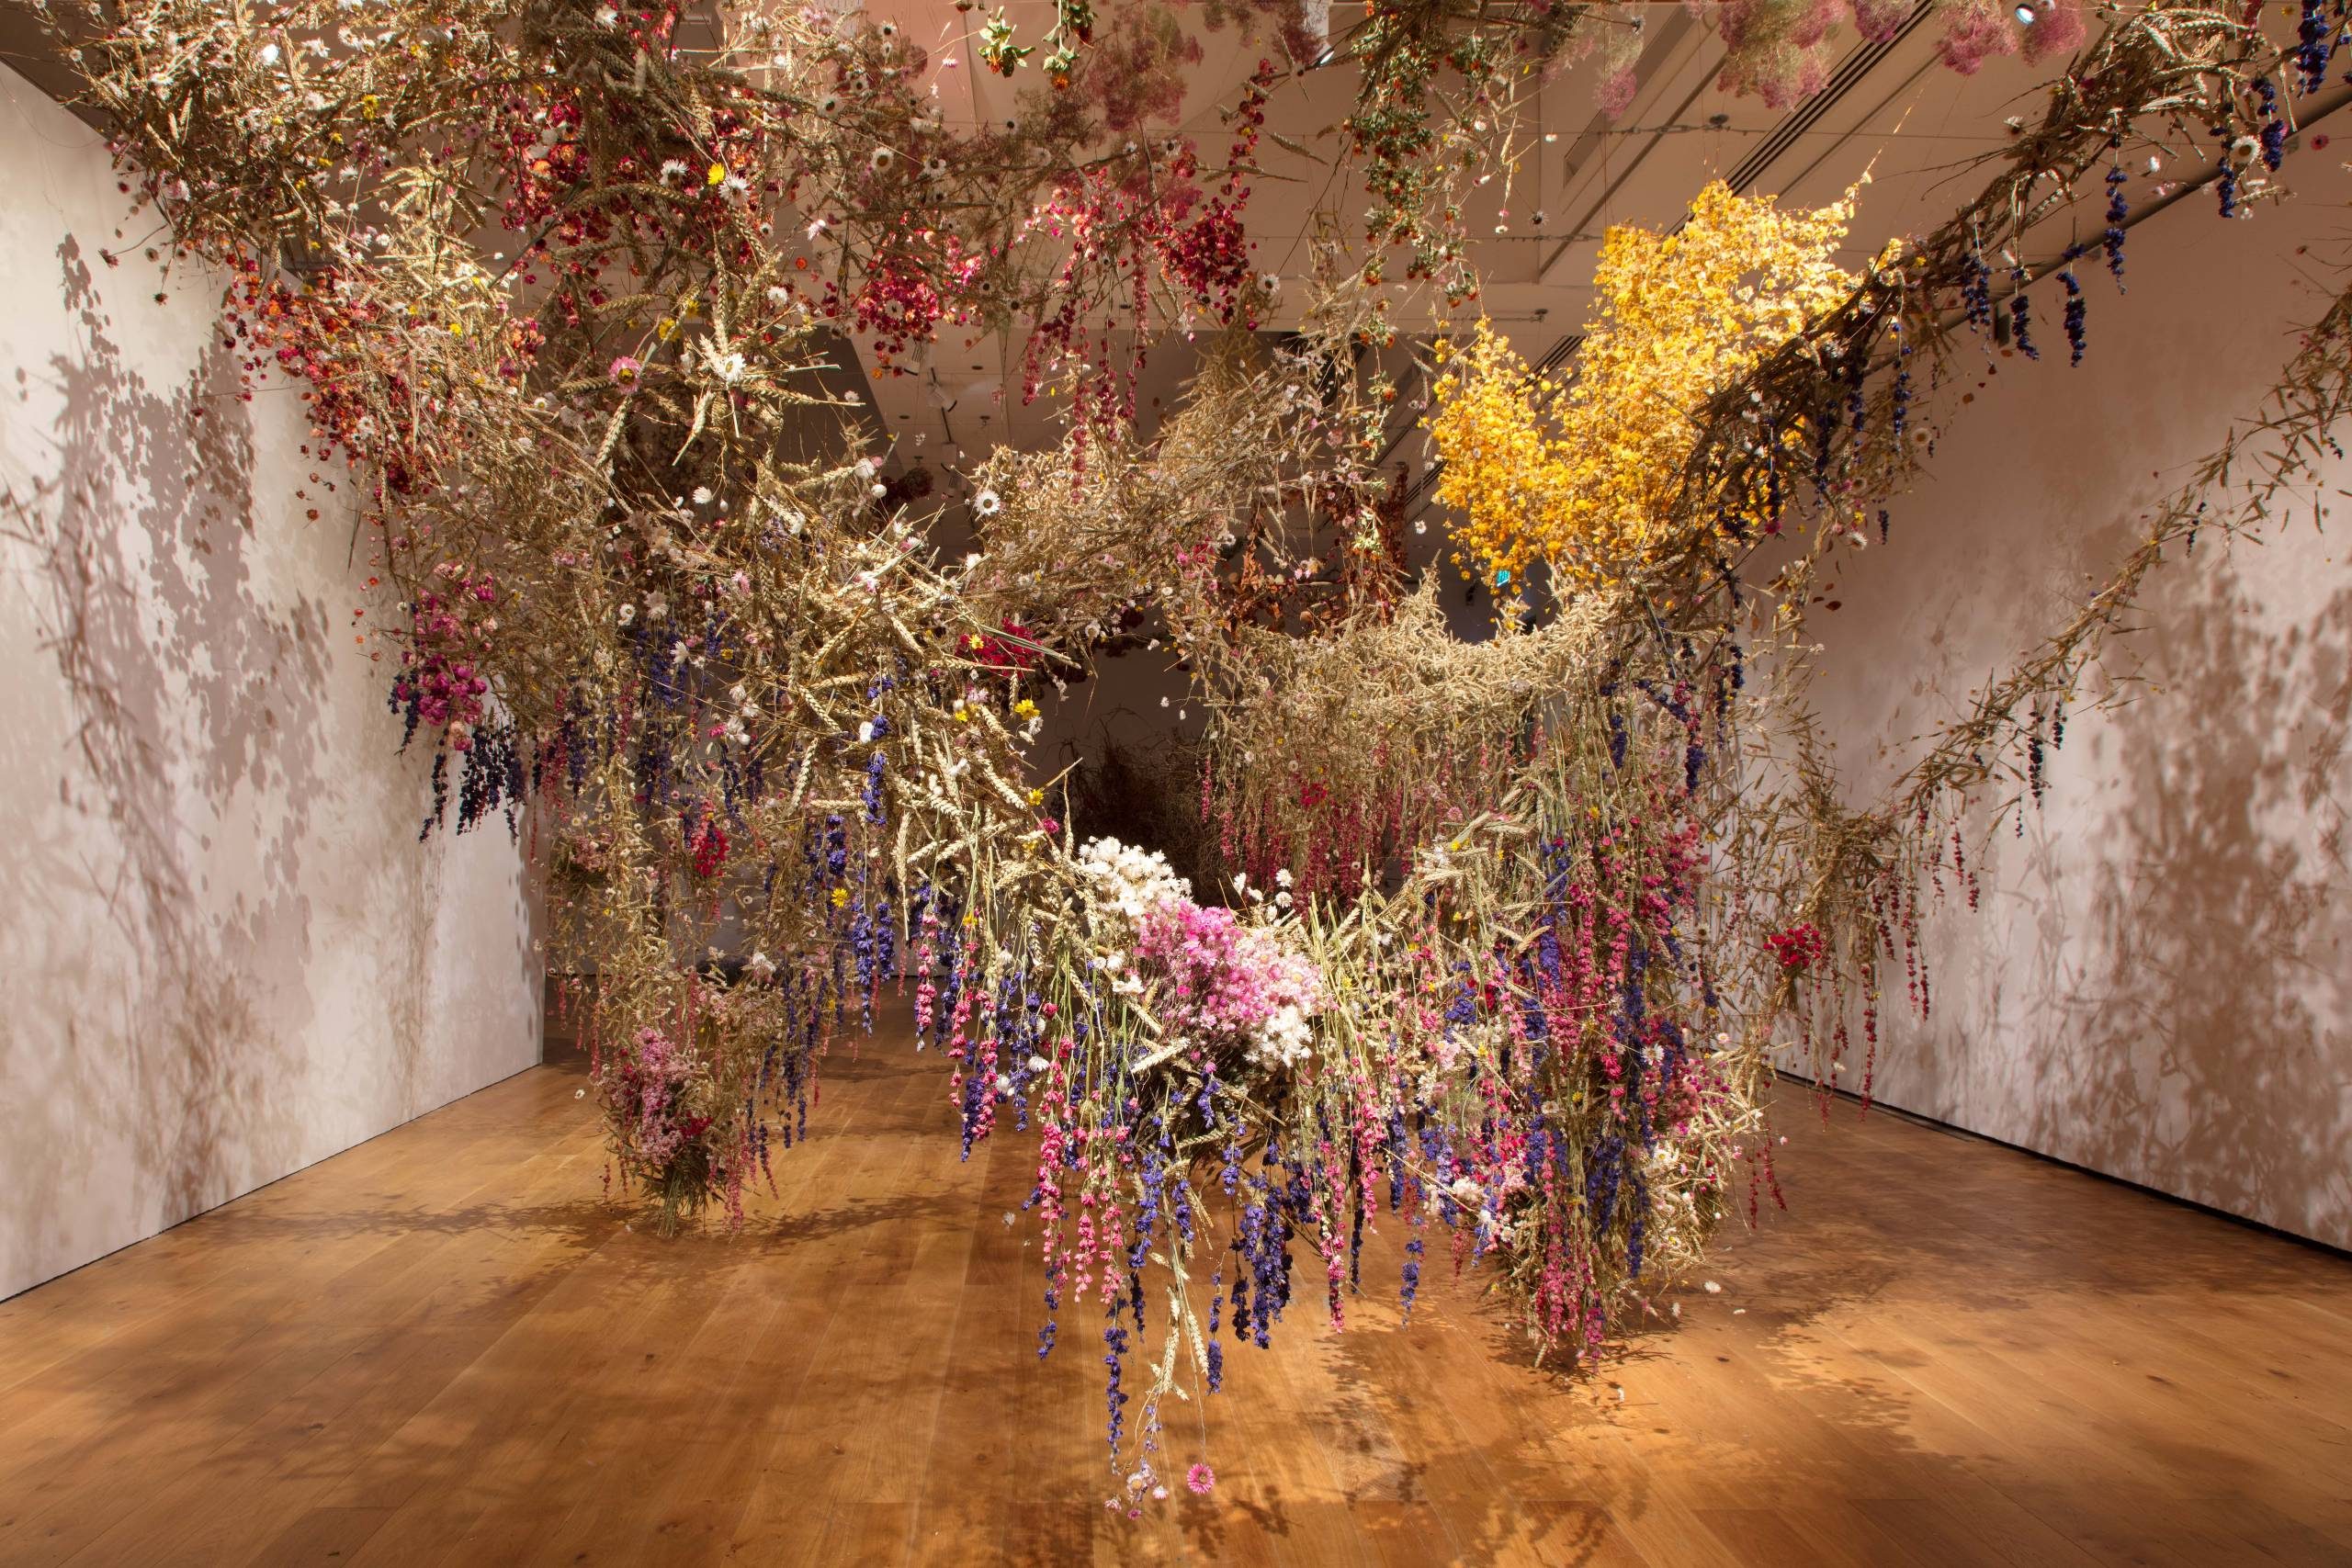 An immersive art installation featuring a room filled with hanging dried flower arrangements and plant materials in rich colours like yellow, red, purple, and white, creating an intricate canopy.